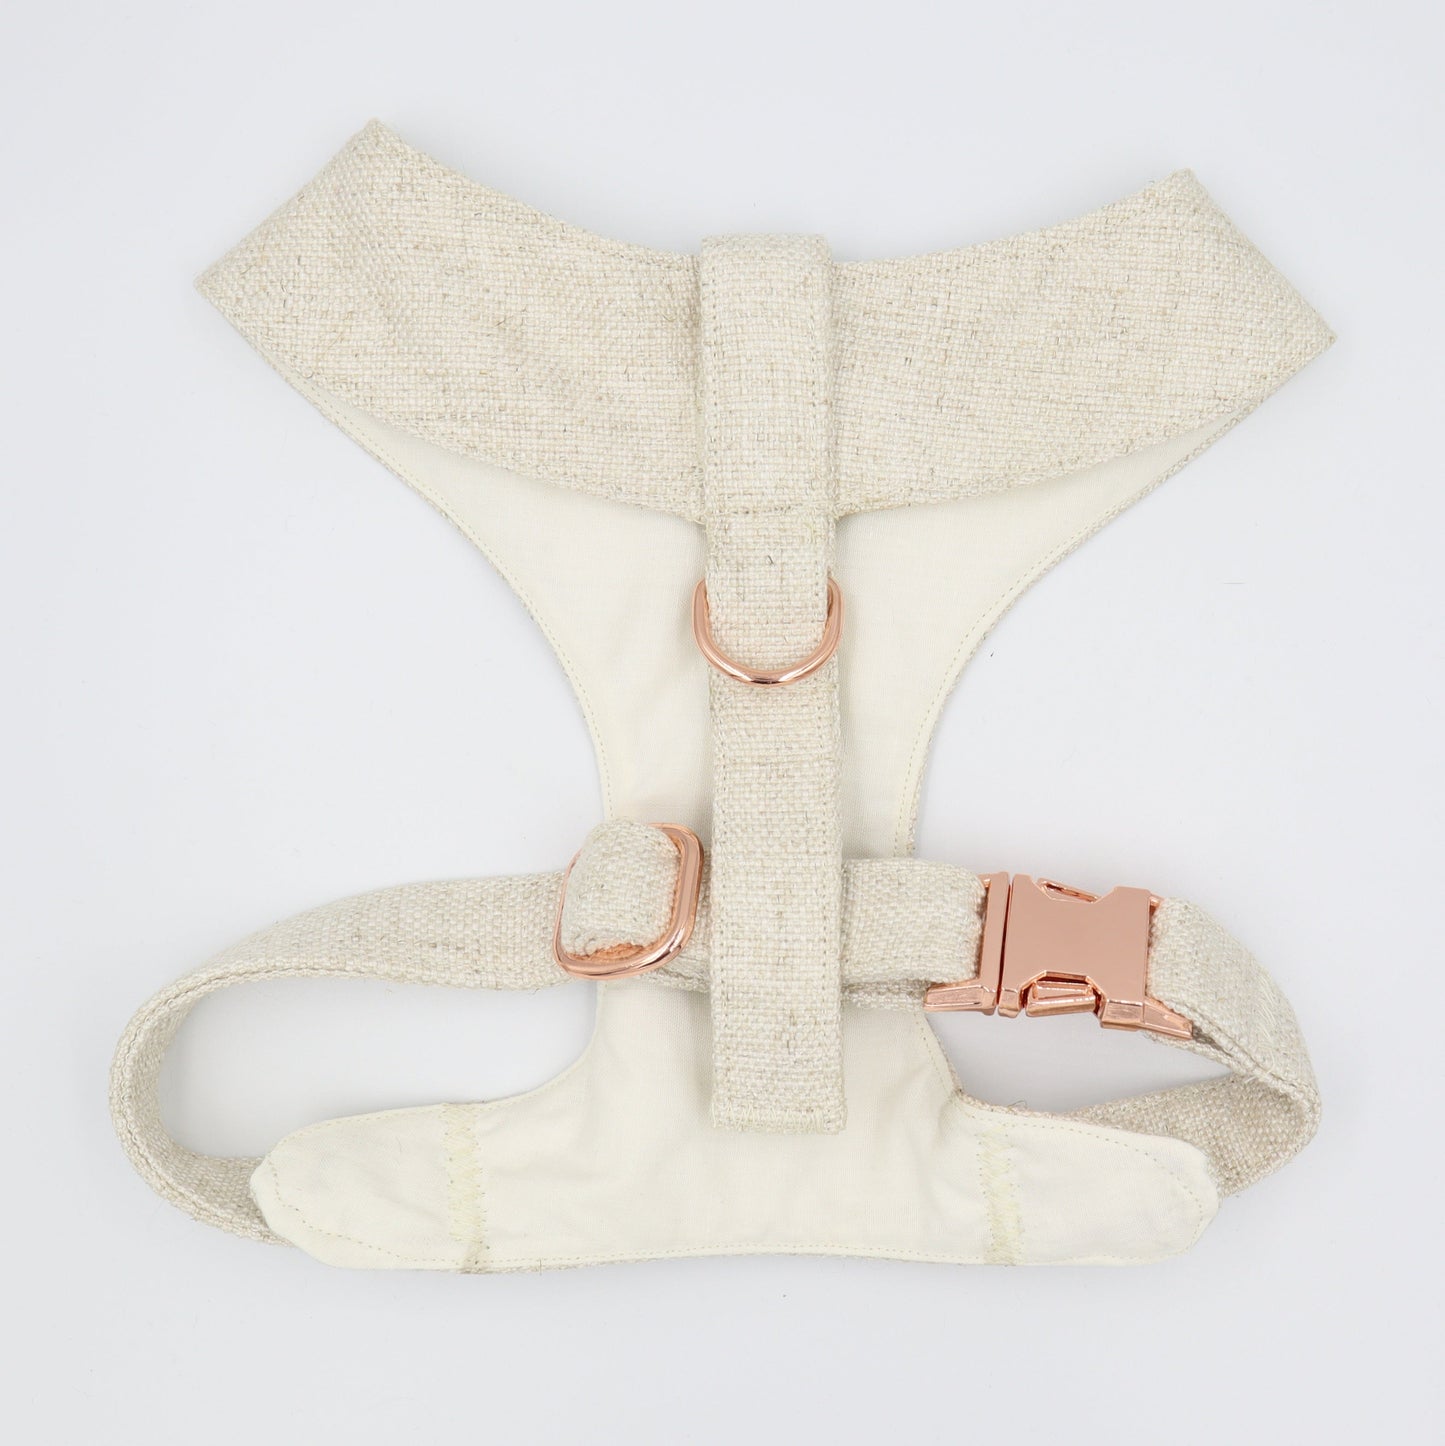 Tuxedo Wedding Dog Harness in Beige & Sage Natural Linen Style TEXTURED Fabric with Sage Satin Bow CHOICE of COLOURS